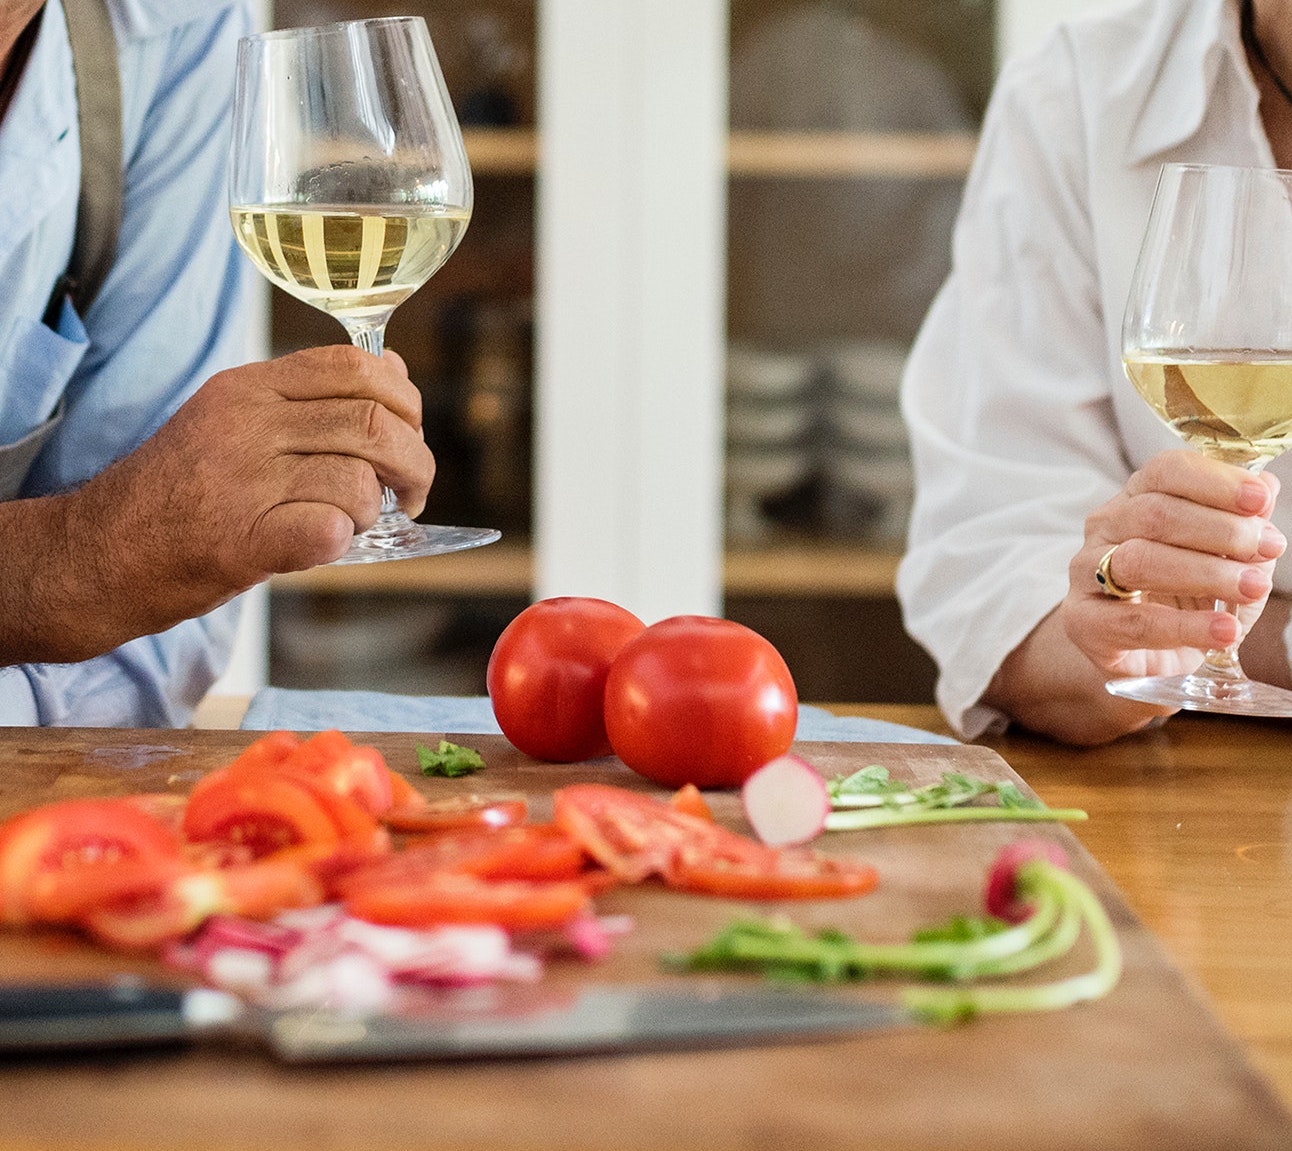 Recipe Round Up: Cooking with Vignoles